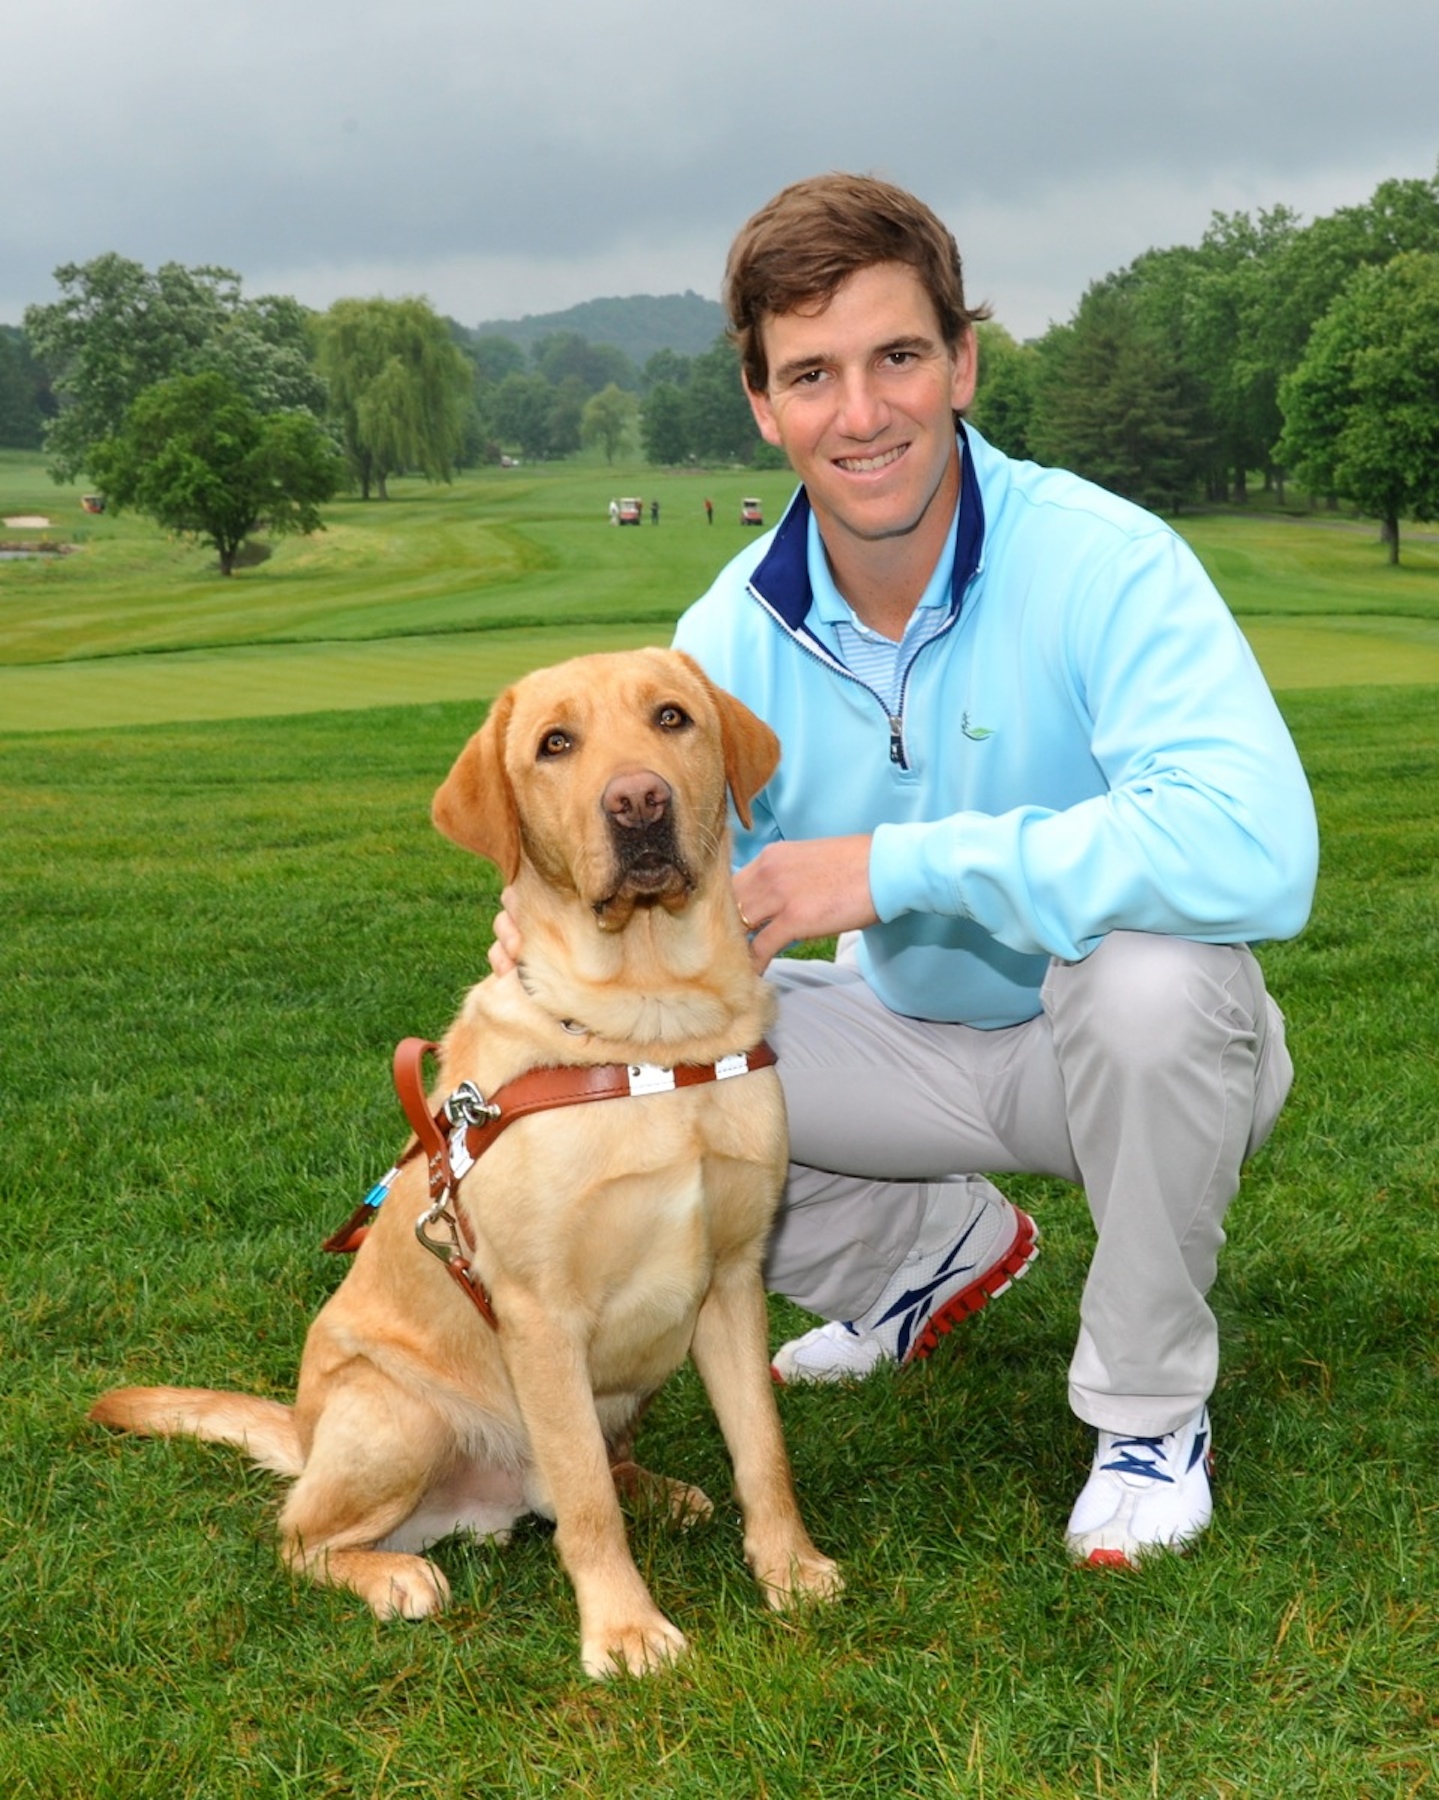 37th Annual Guiding Eyes Golf Classic With NY Giants Quarterback Eli Manning Tees Off ...